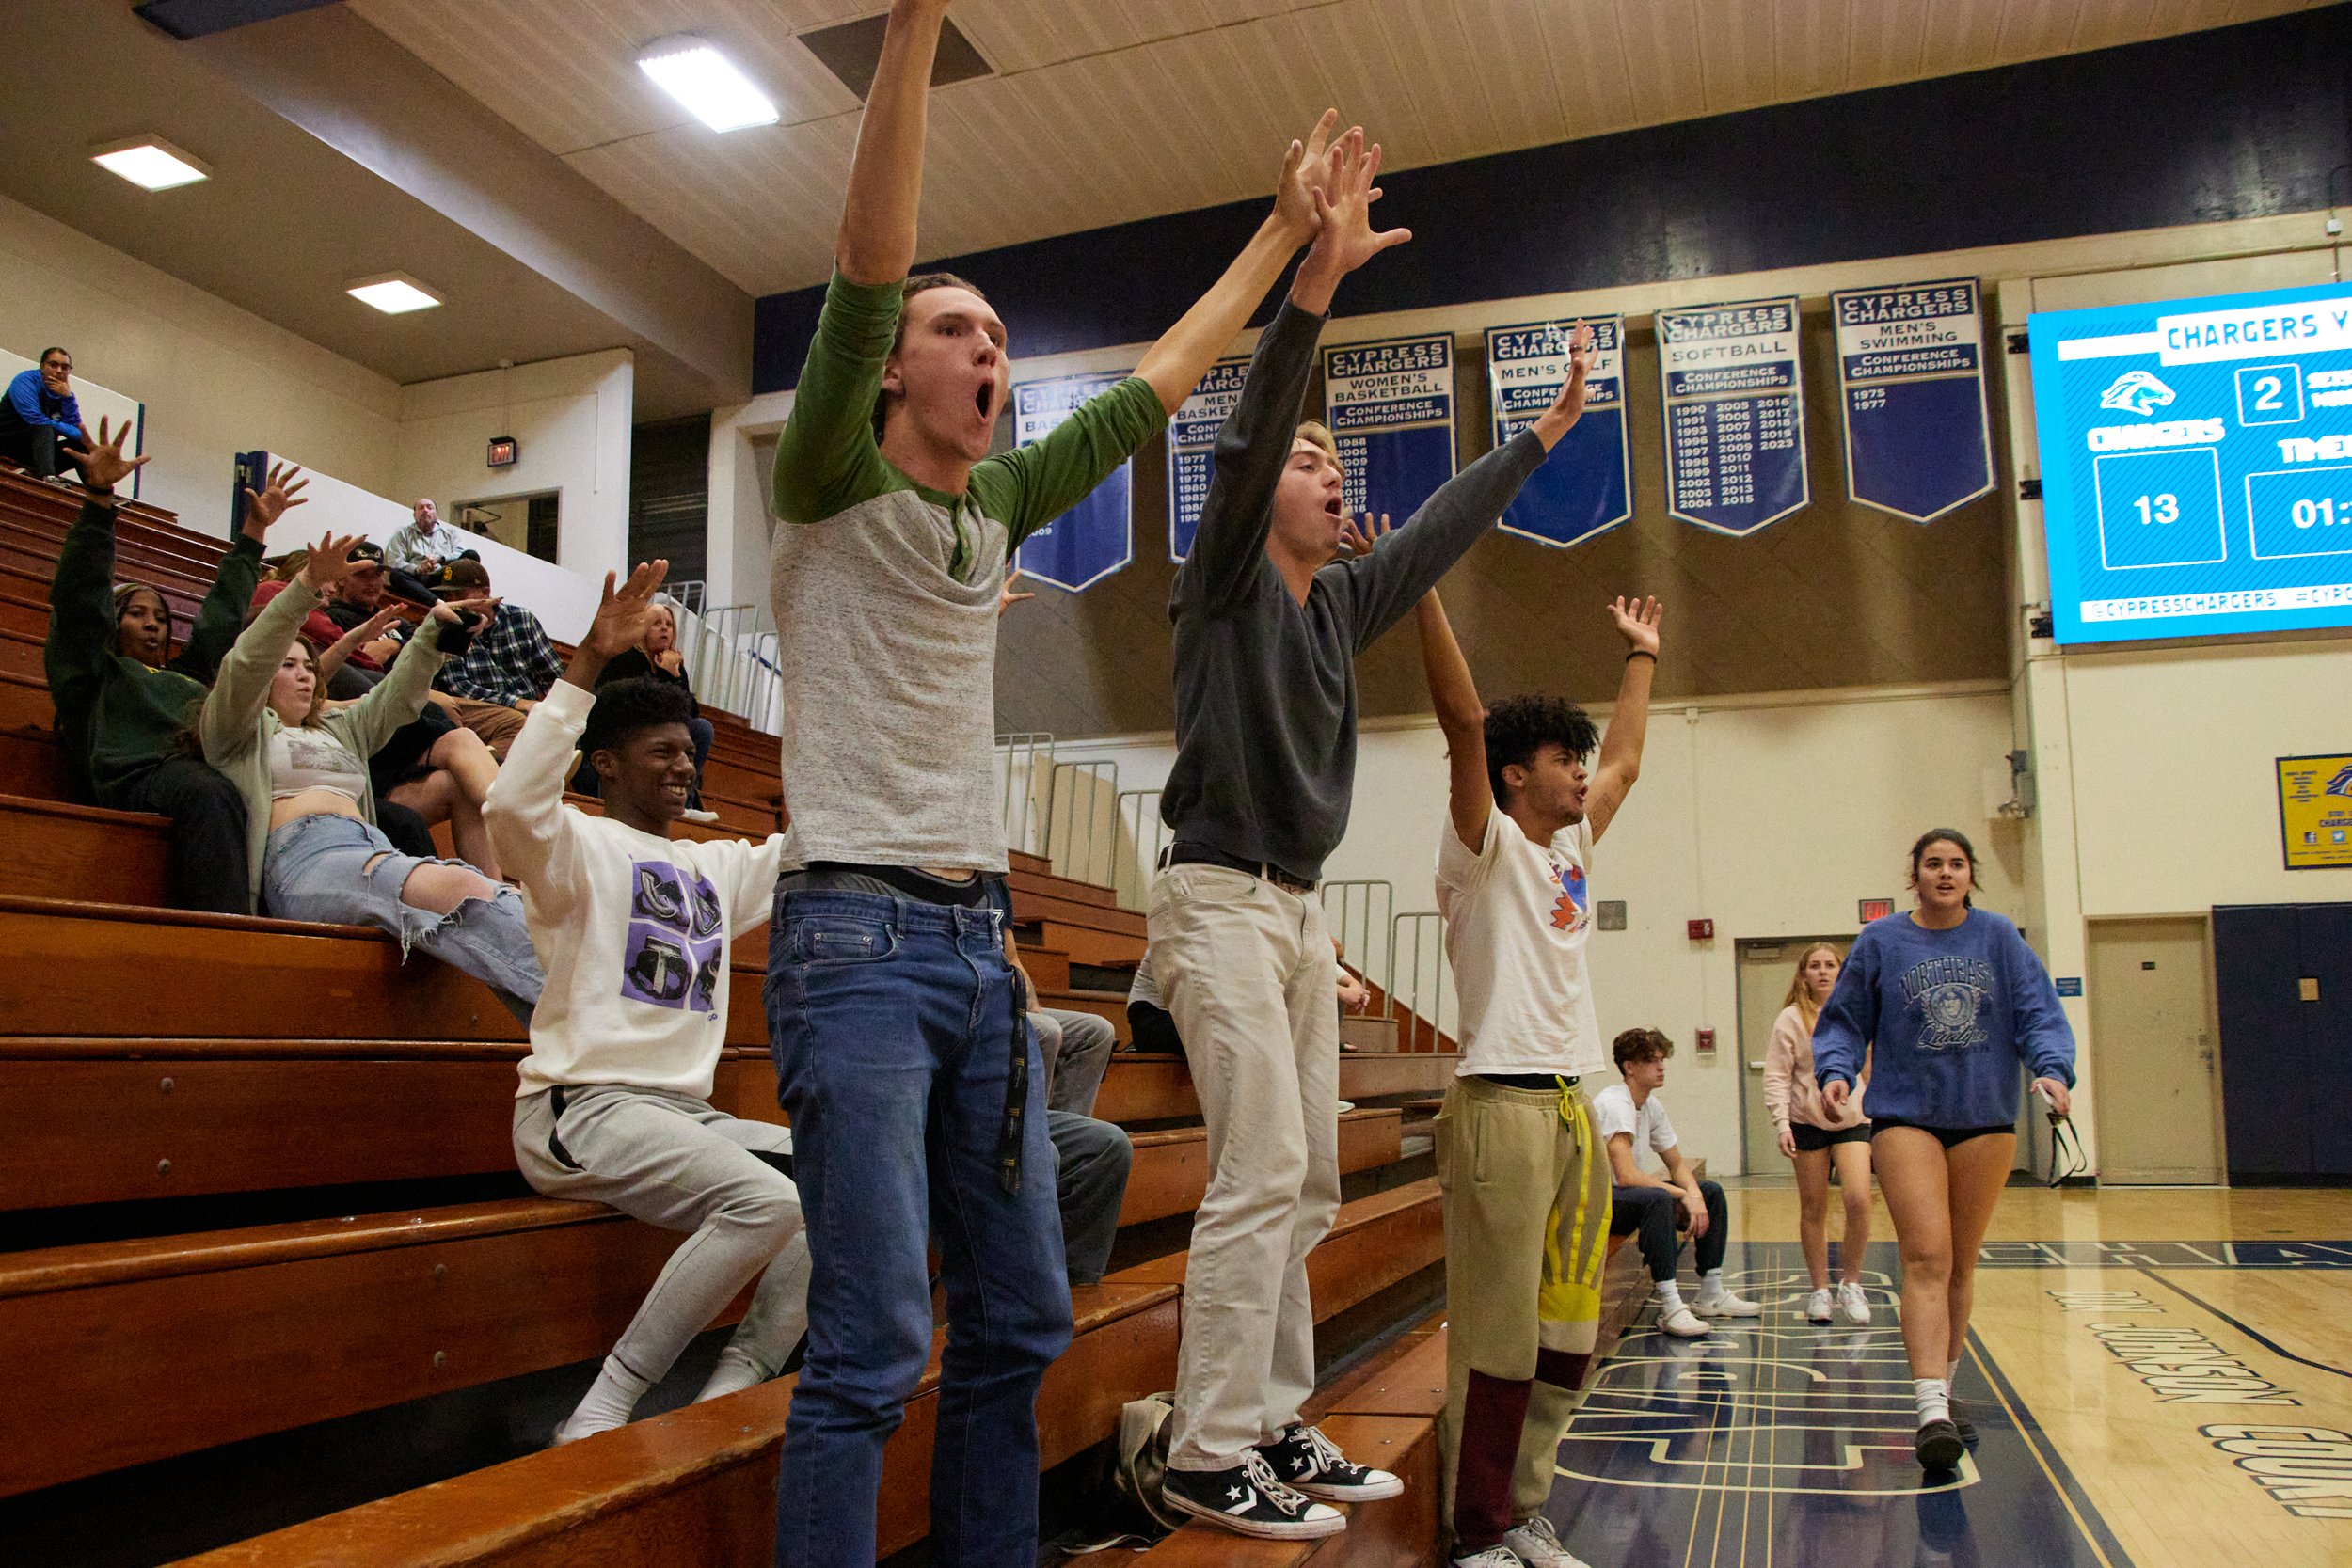  Santa Monica College students (L to R) Peter Dalton Droog, Bryce Bowsher, and Nate Davis cheering during the fith set at the women's volleyball match against Cypress College Chargers at Cypress College Gymnasium number 2, Cypress, Calif., on Nov 21,